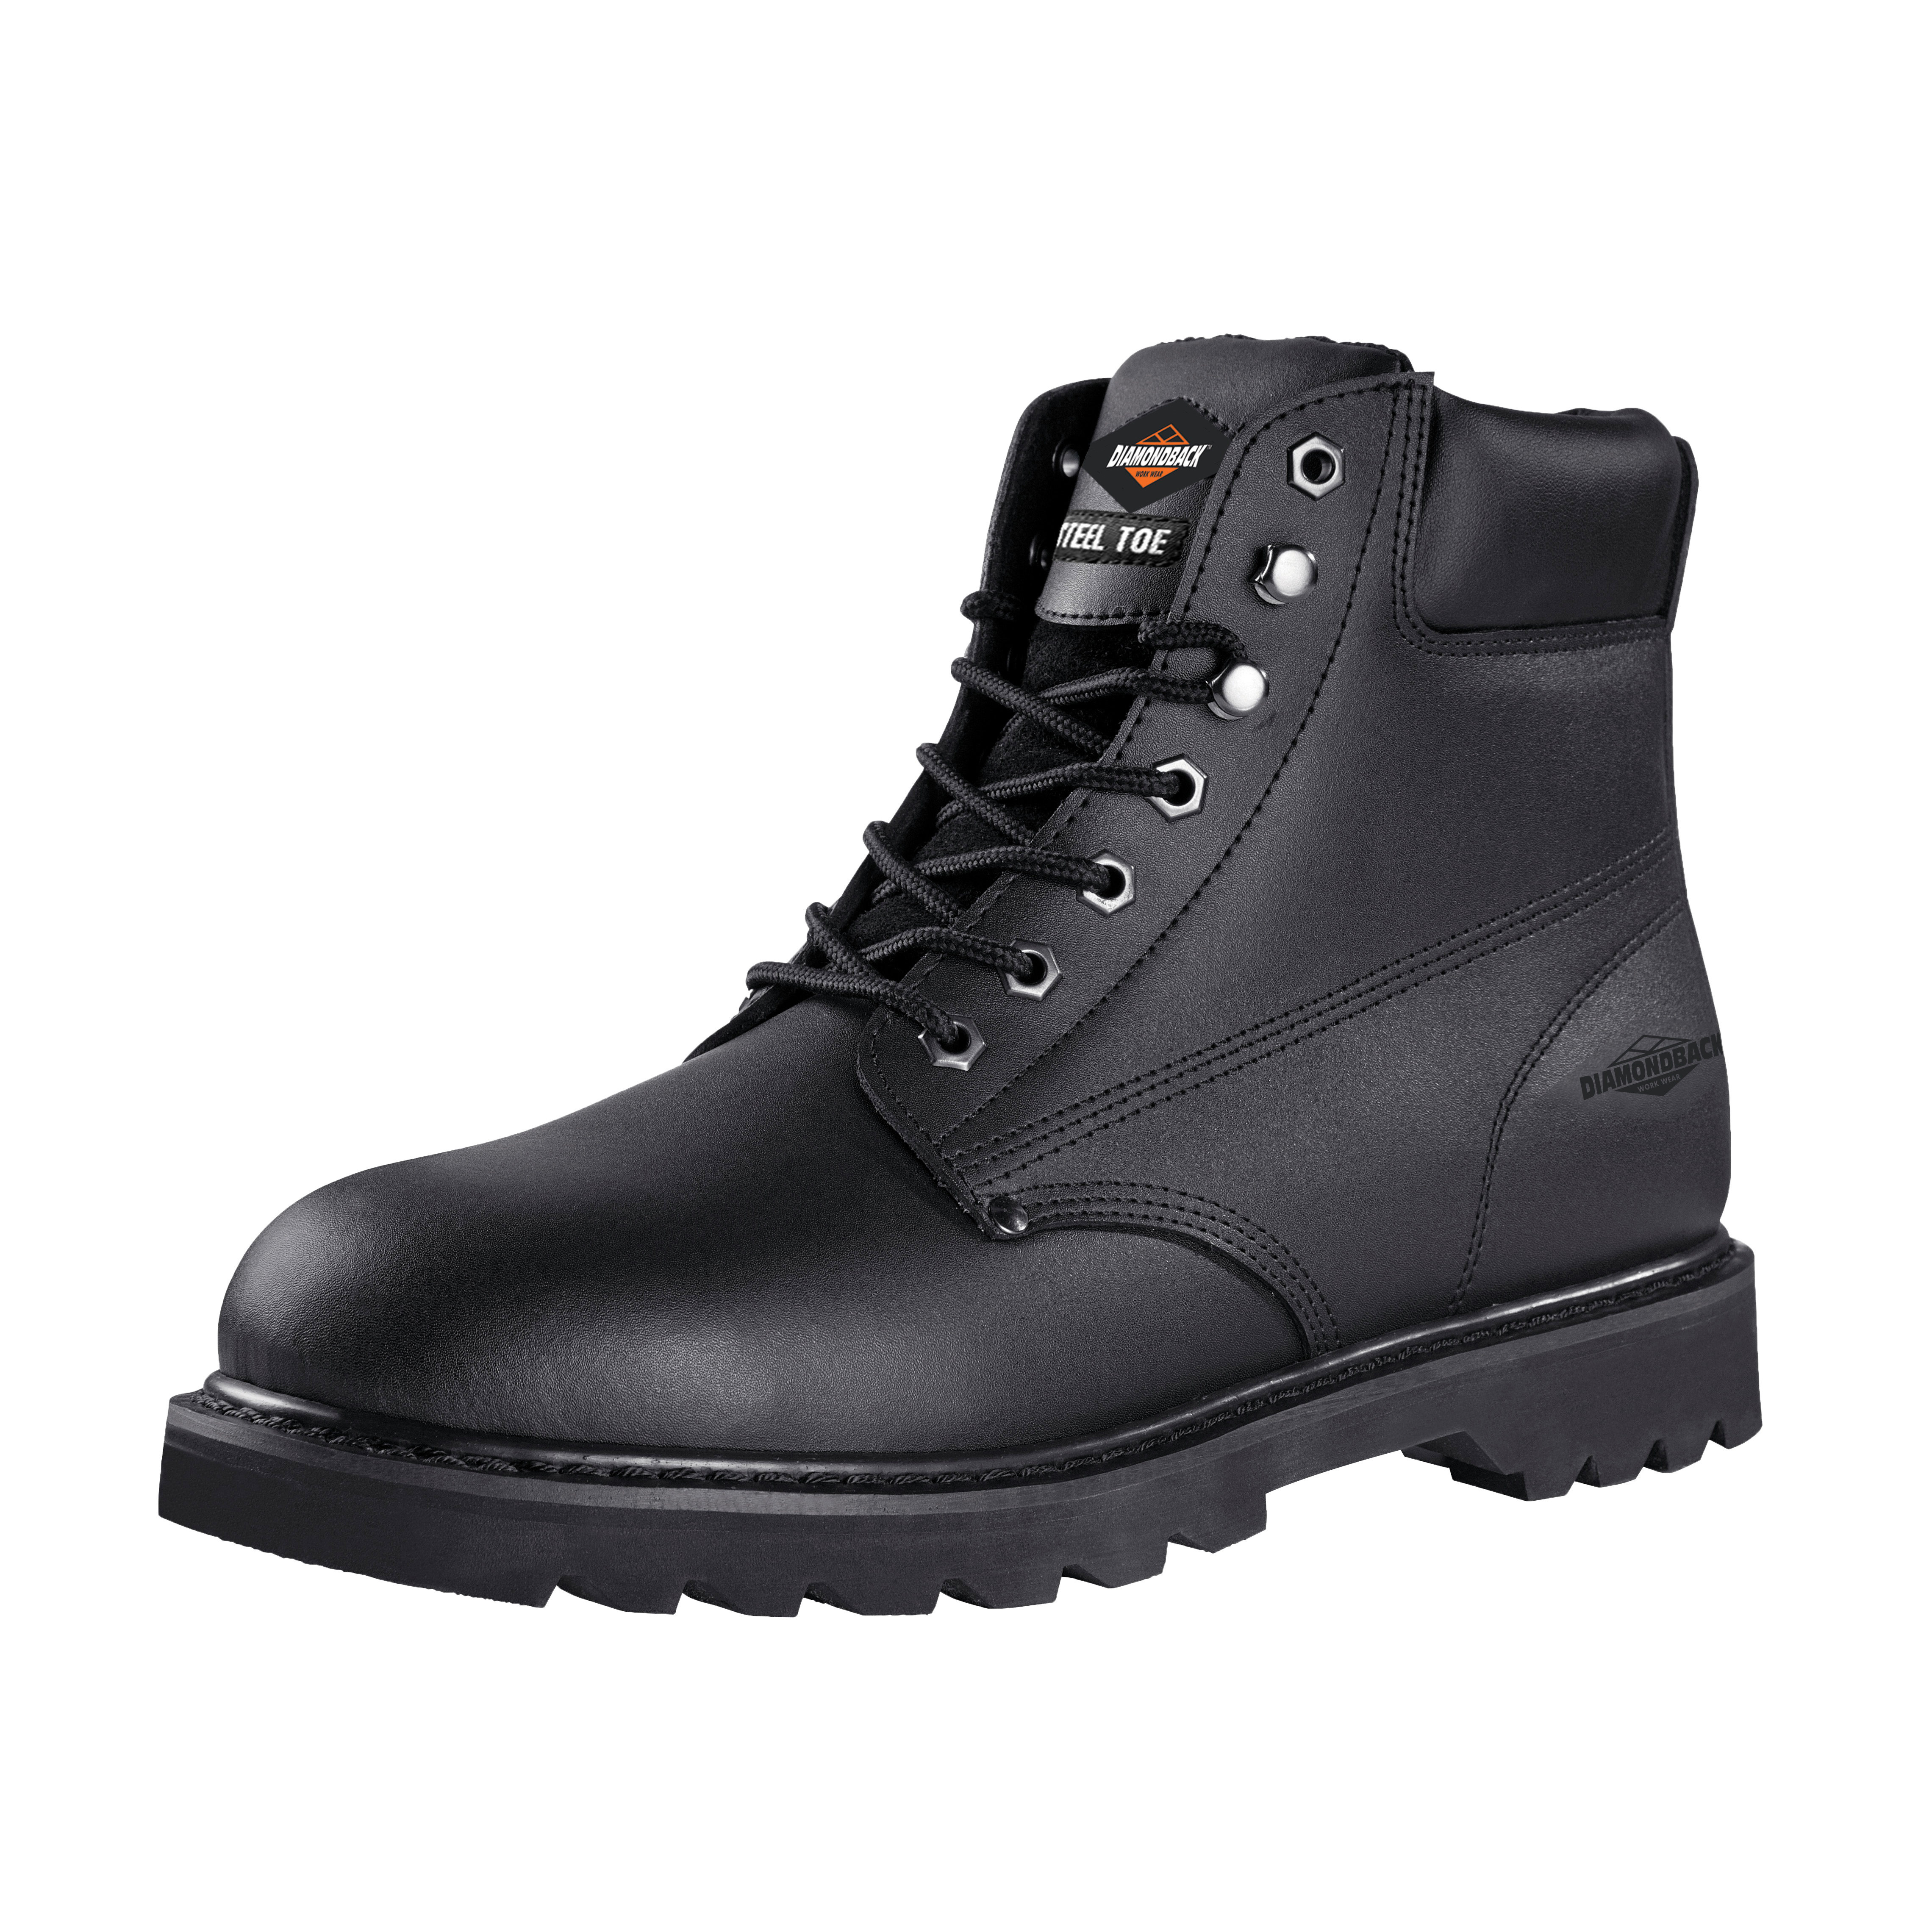 Work Boots, 8.5, Medium W, Black, Leather Upper, Lace-Up, Steel Toe, With Lining